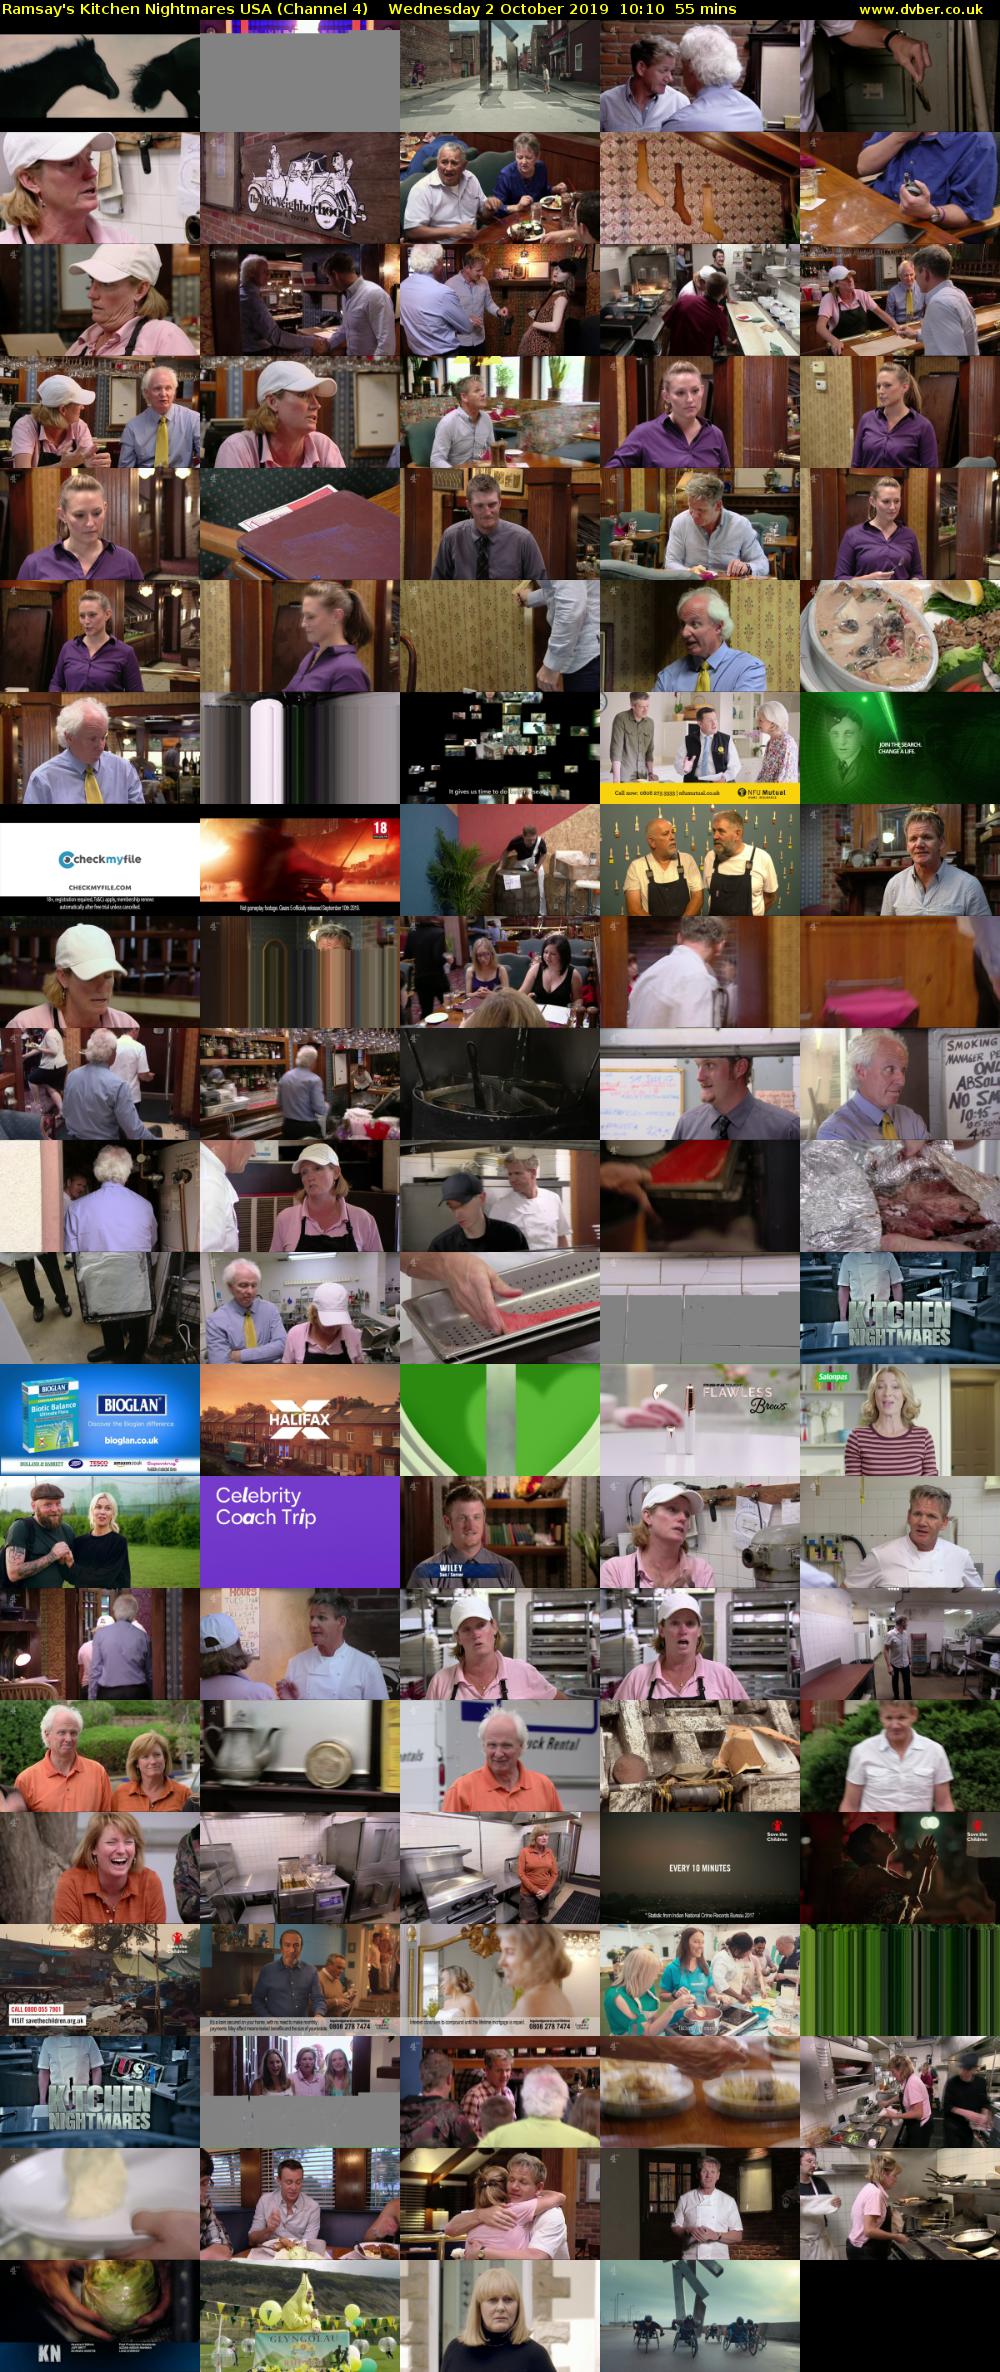 Ramsay's Kitchen Nightmares USA (Channel 4) Wednesday 2 October 2019 10:10 - 11:05